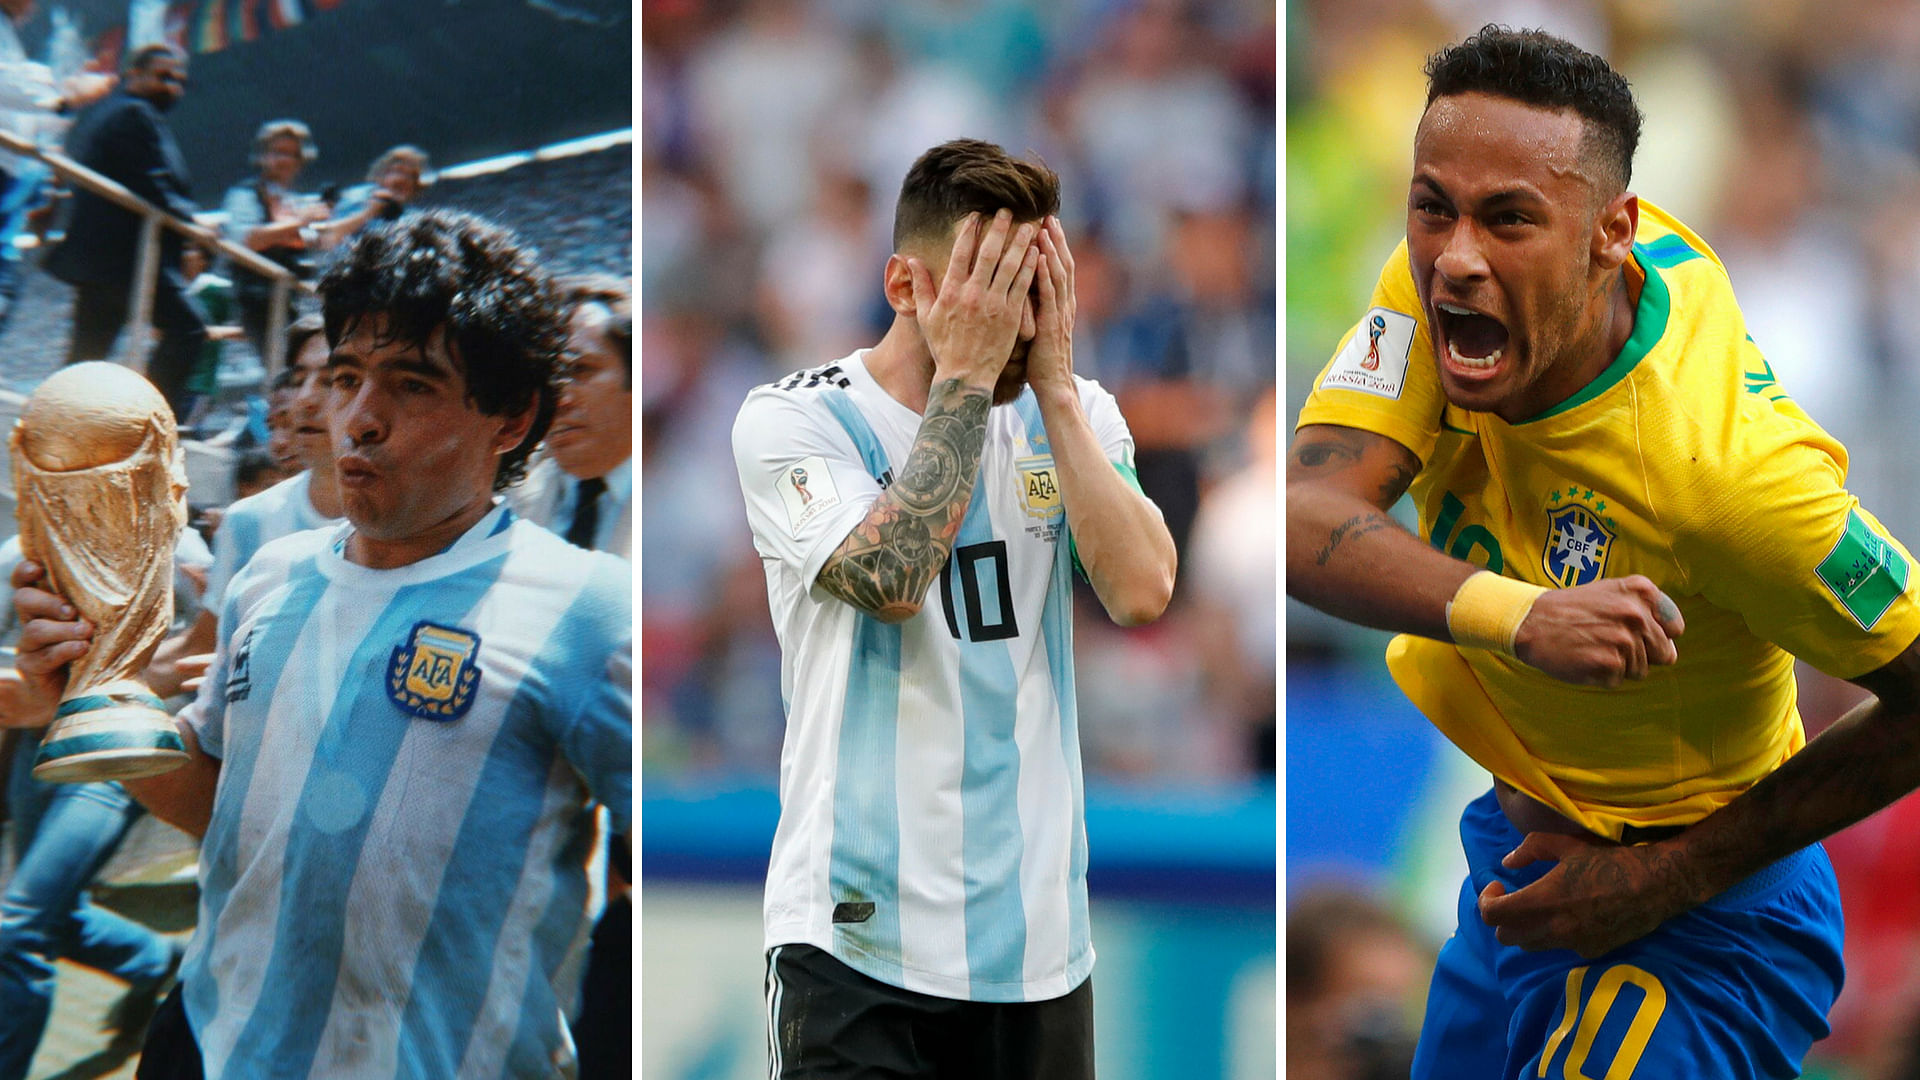 Maradona and Neymar have achieved success with flashy personalities whereas Messi has struggled in Argentina’s colours with his quiet one